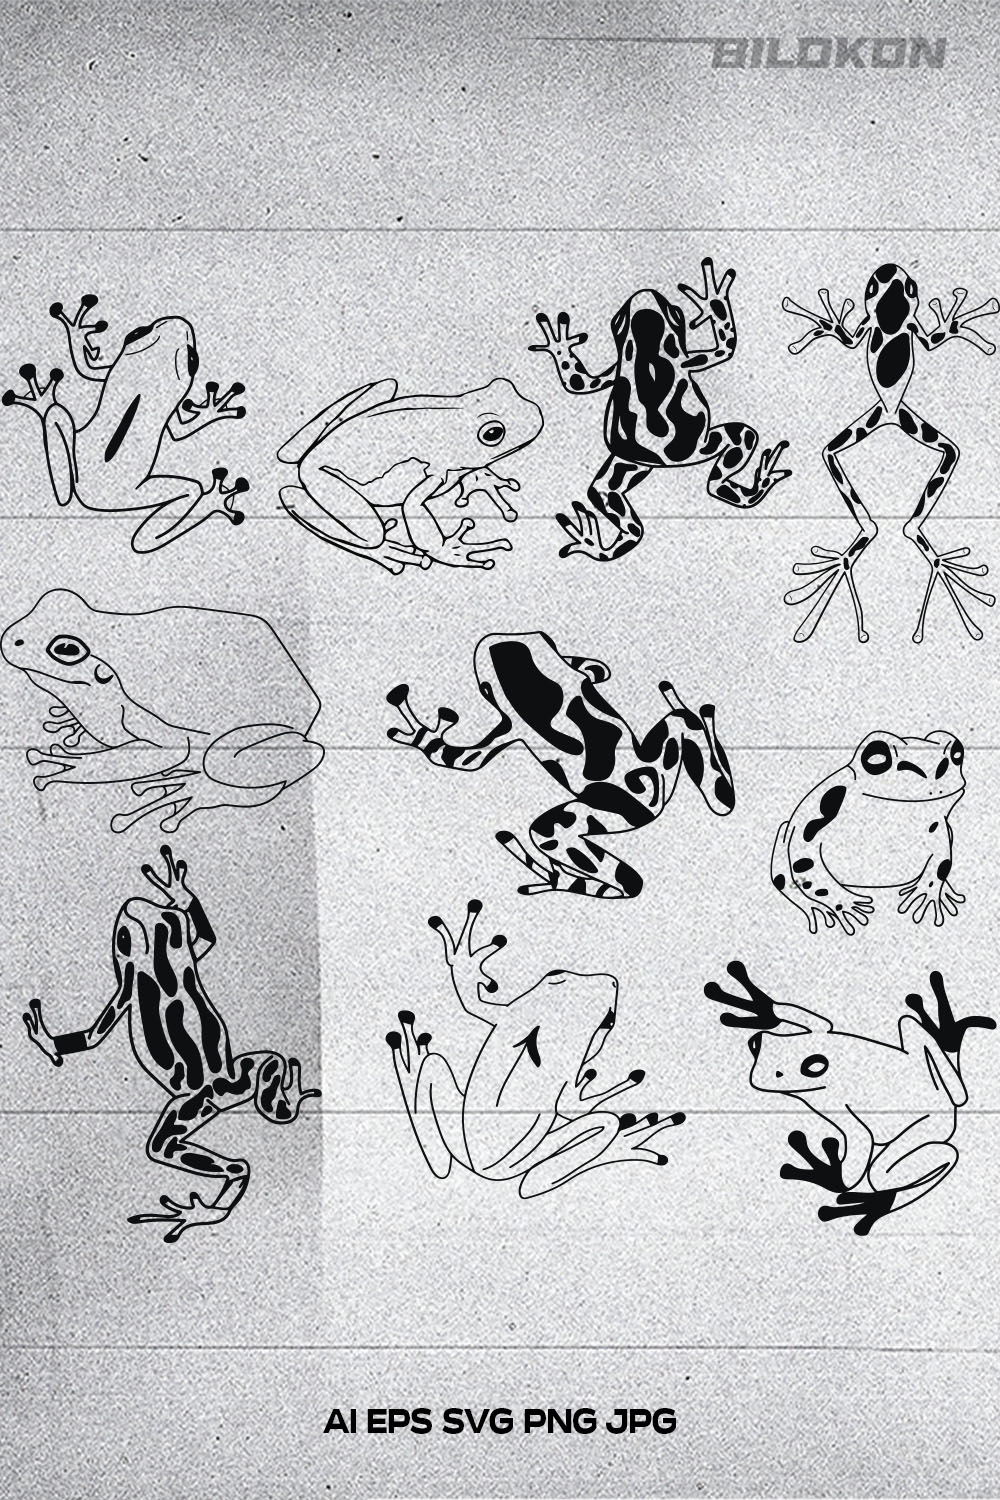 Black and white photo of frogs on a sheet of paper.